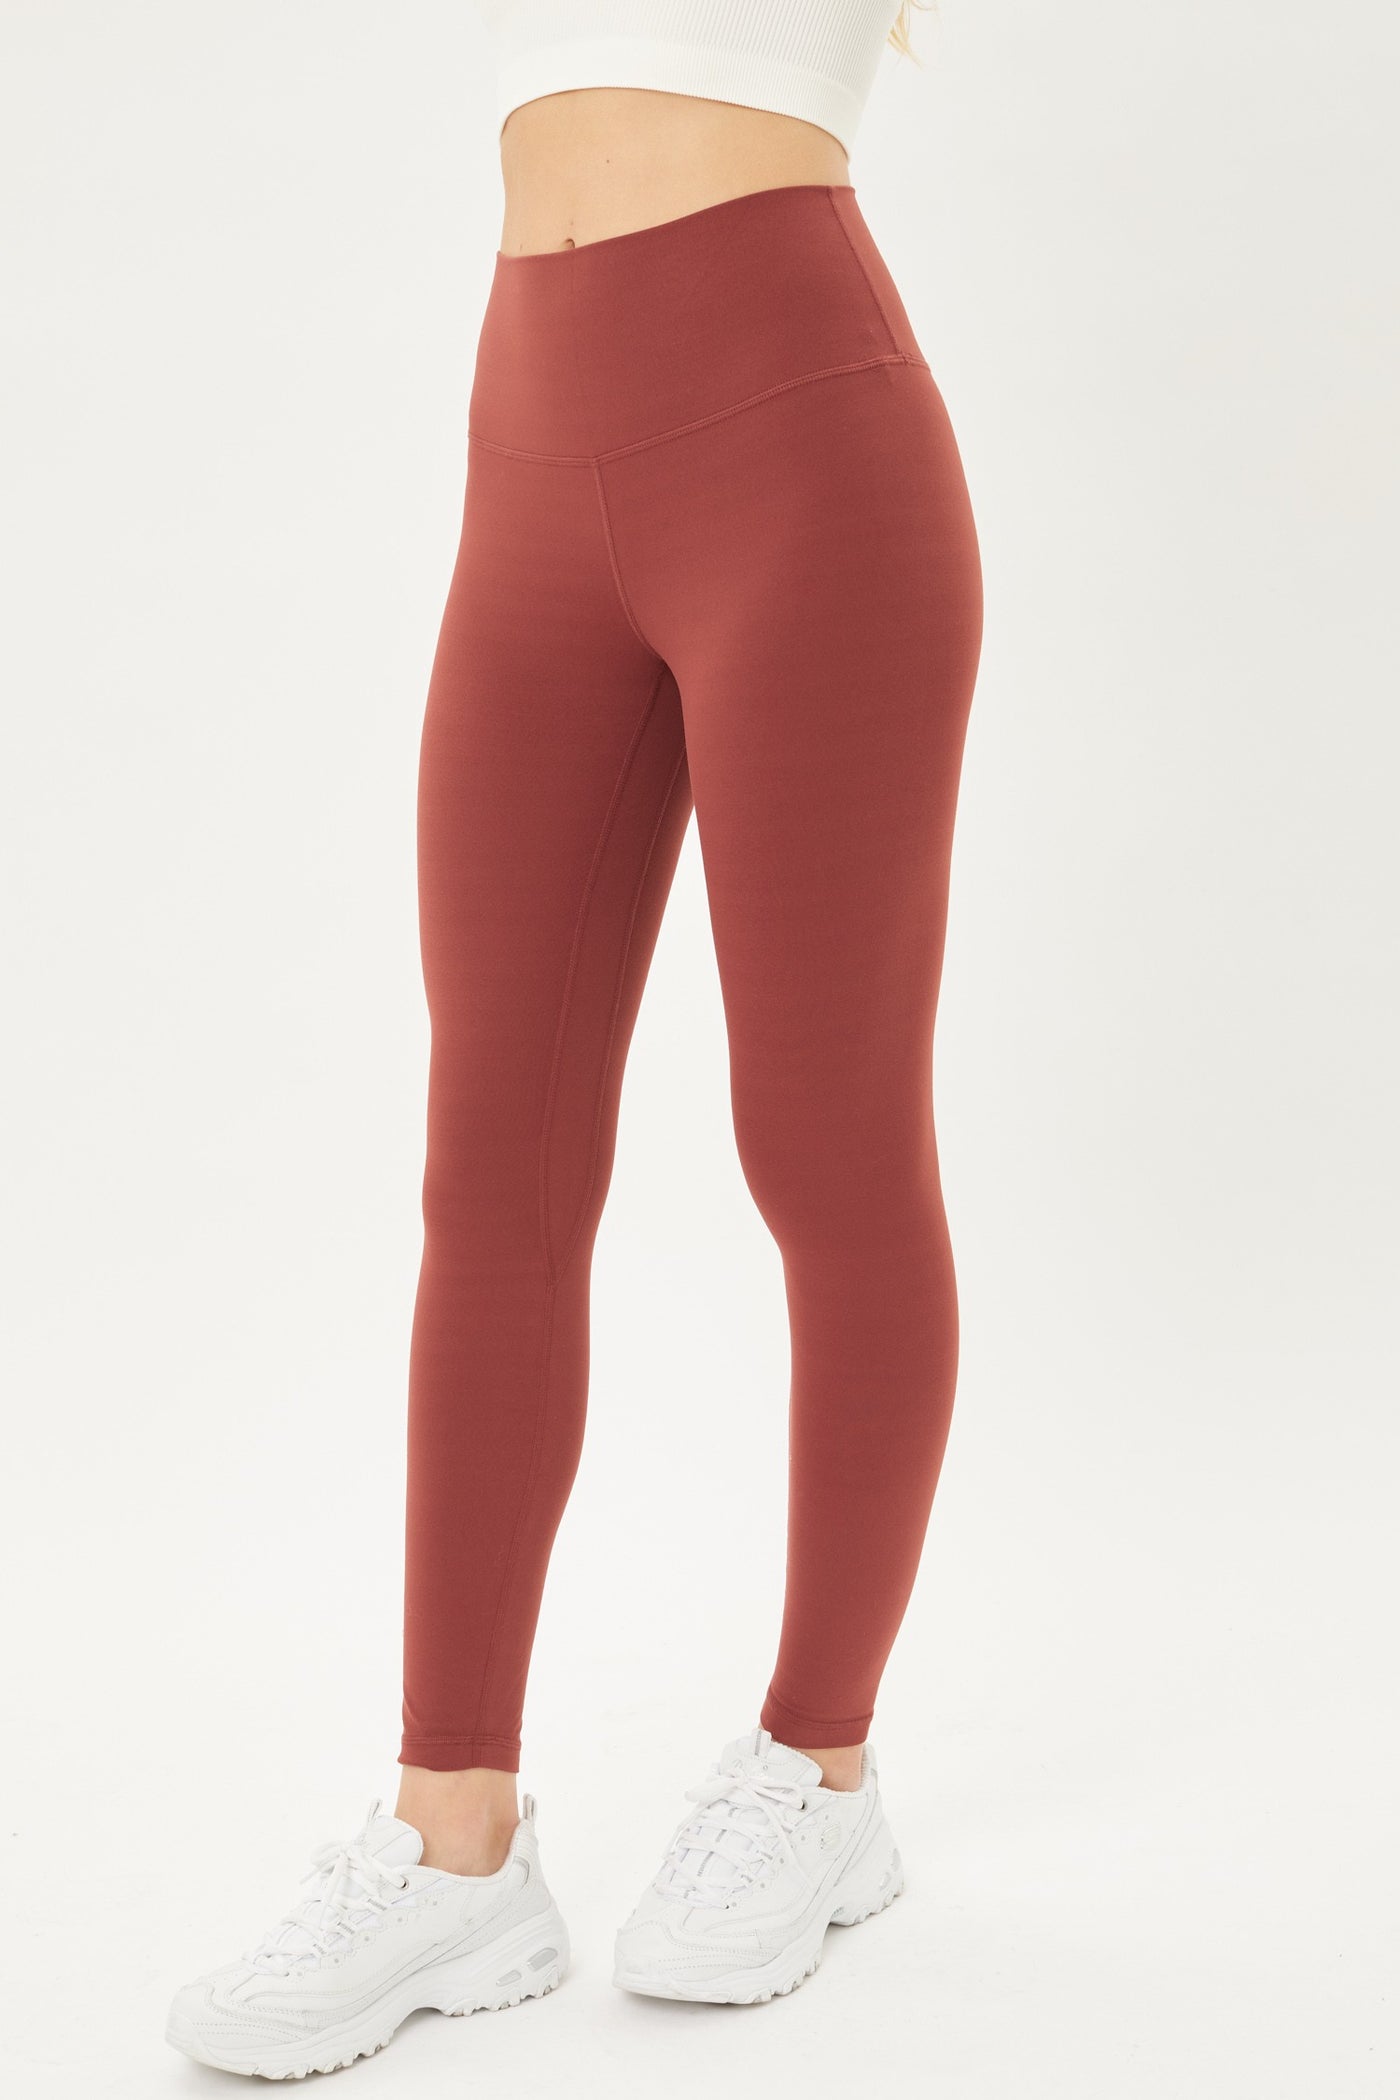 beetroot buttersoft solid legging